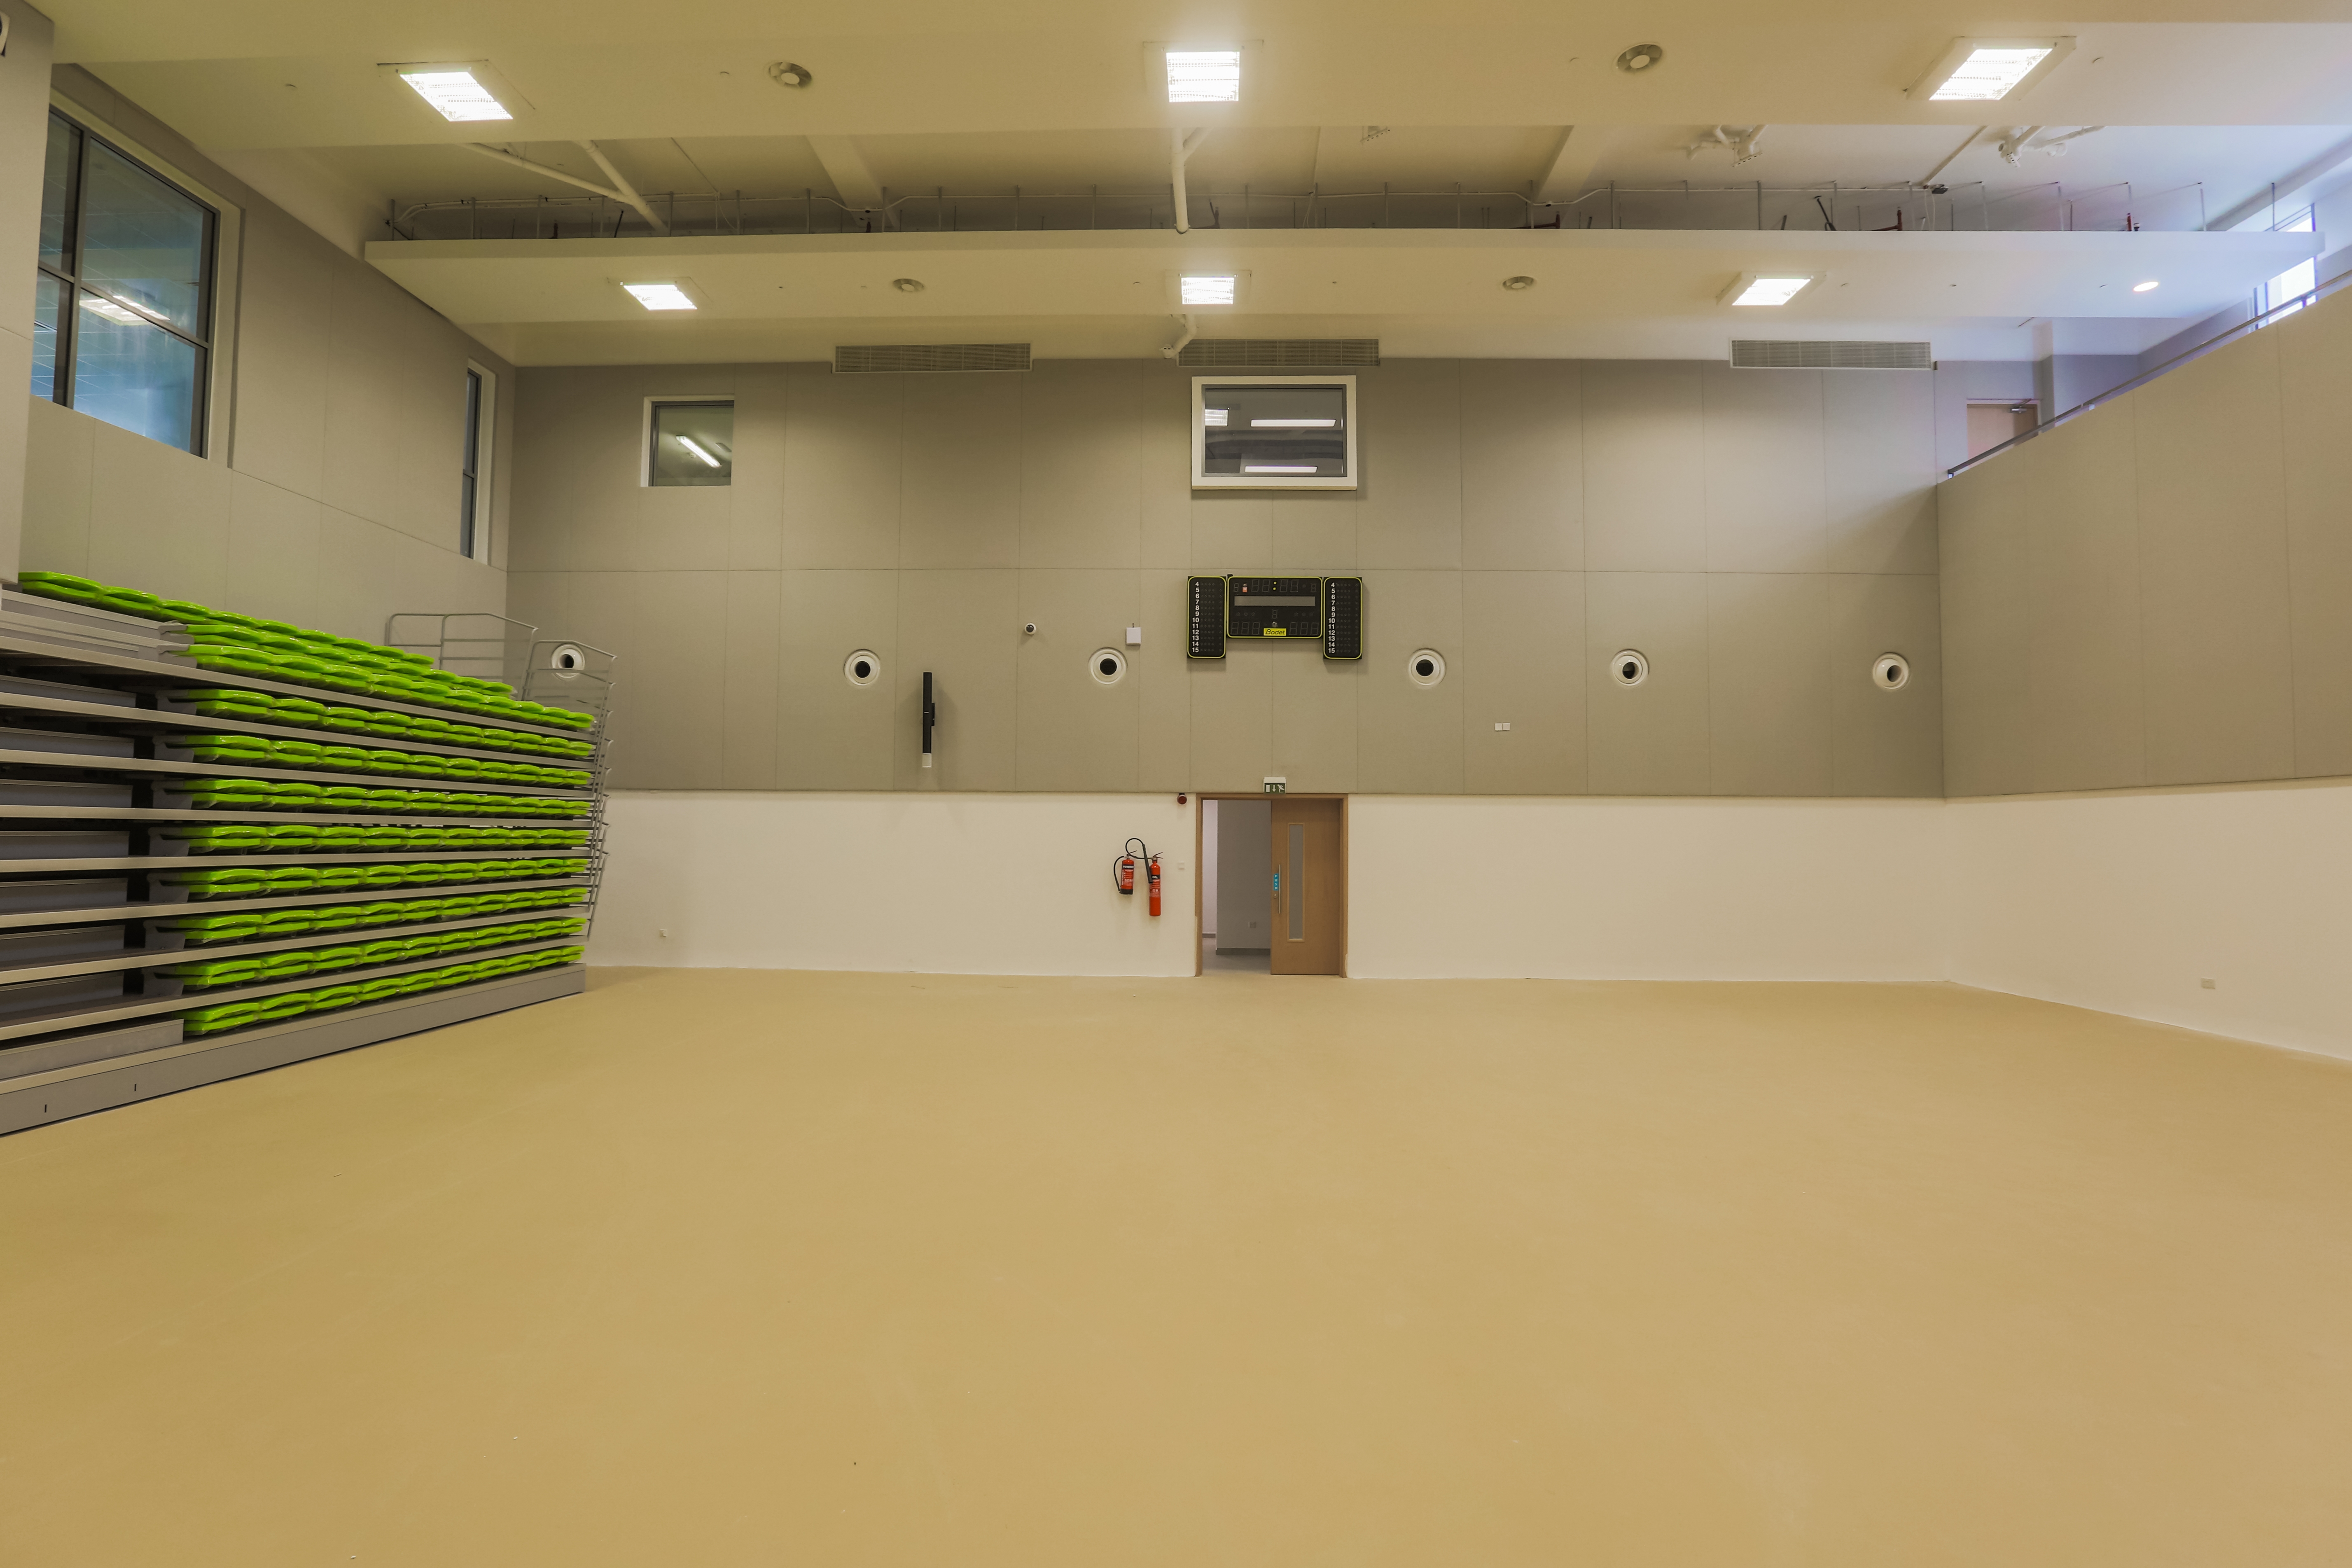 Environmentally Friendly Ceiling Tilesour gallery suspended ceiling drop ceiling tiles dubai